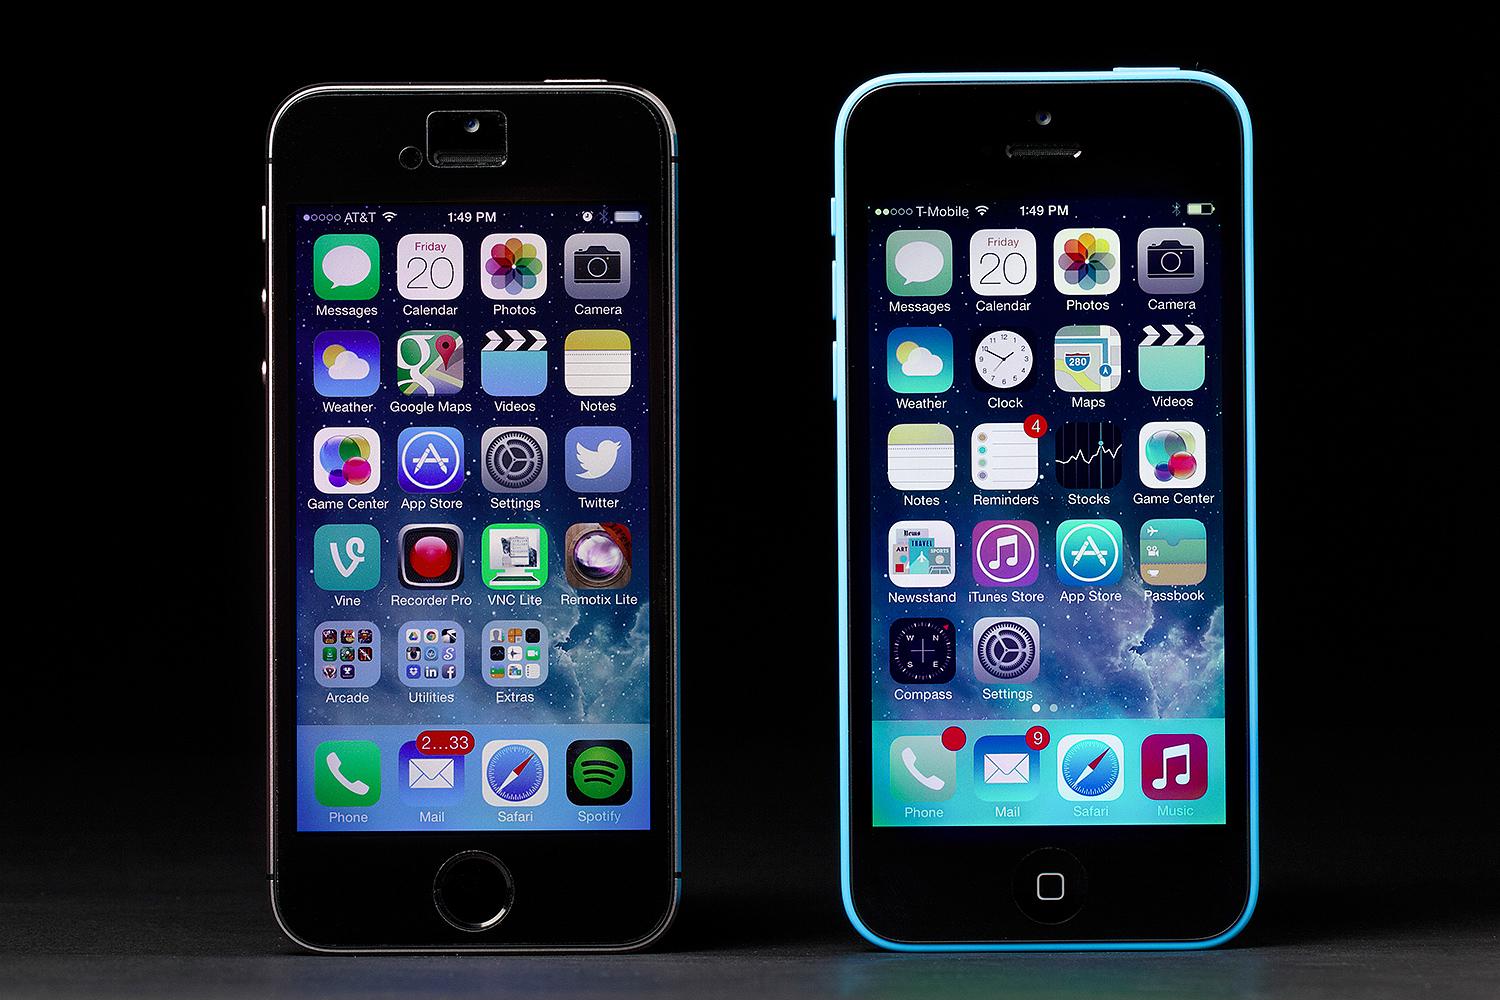 iPhone 5S/5C: How to Spruce Up iOS 7 | Digital Trends